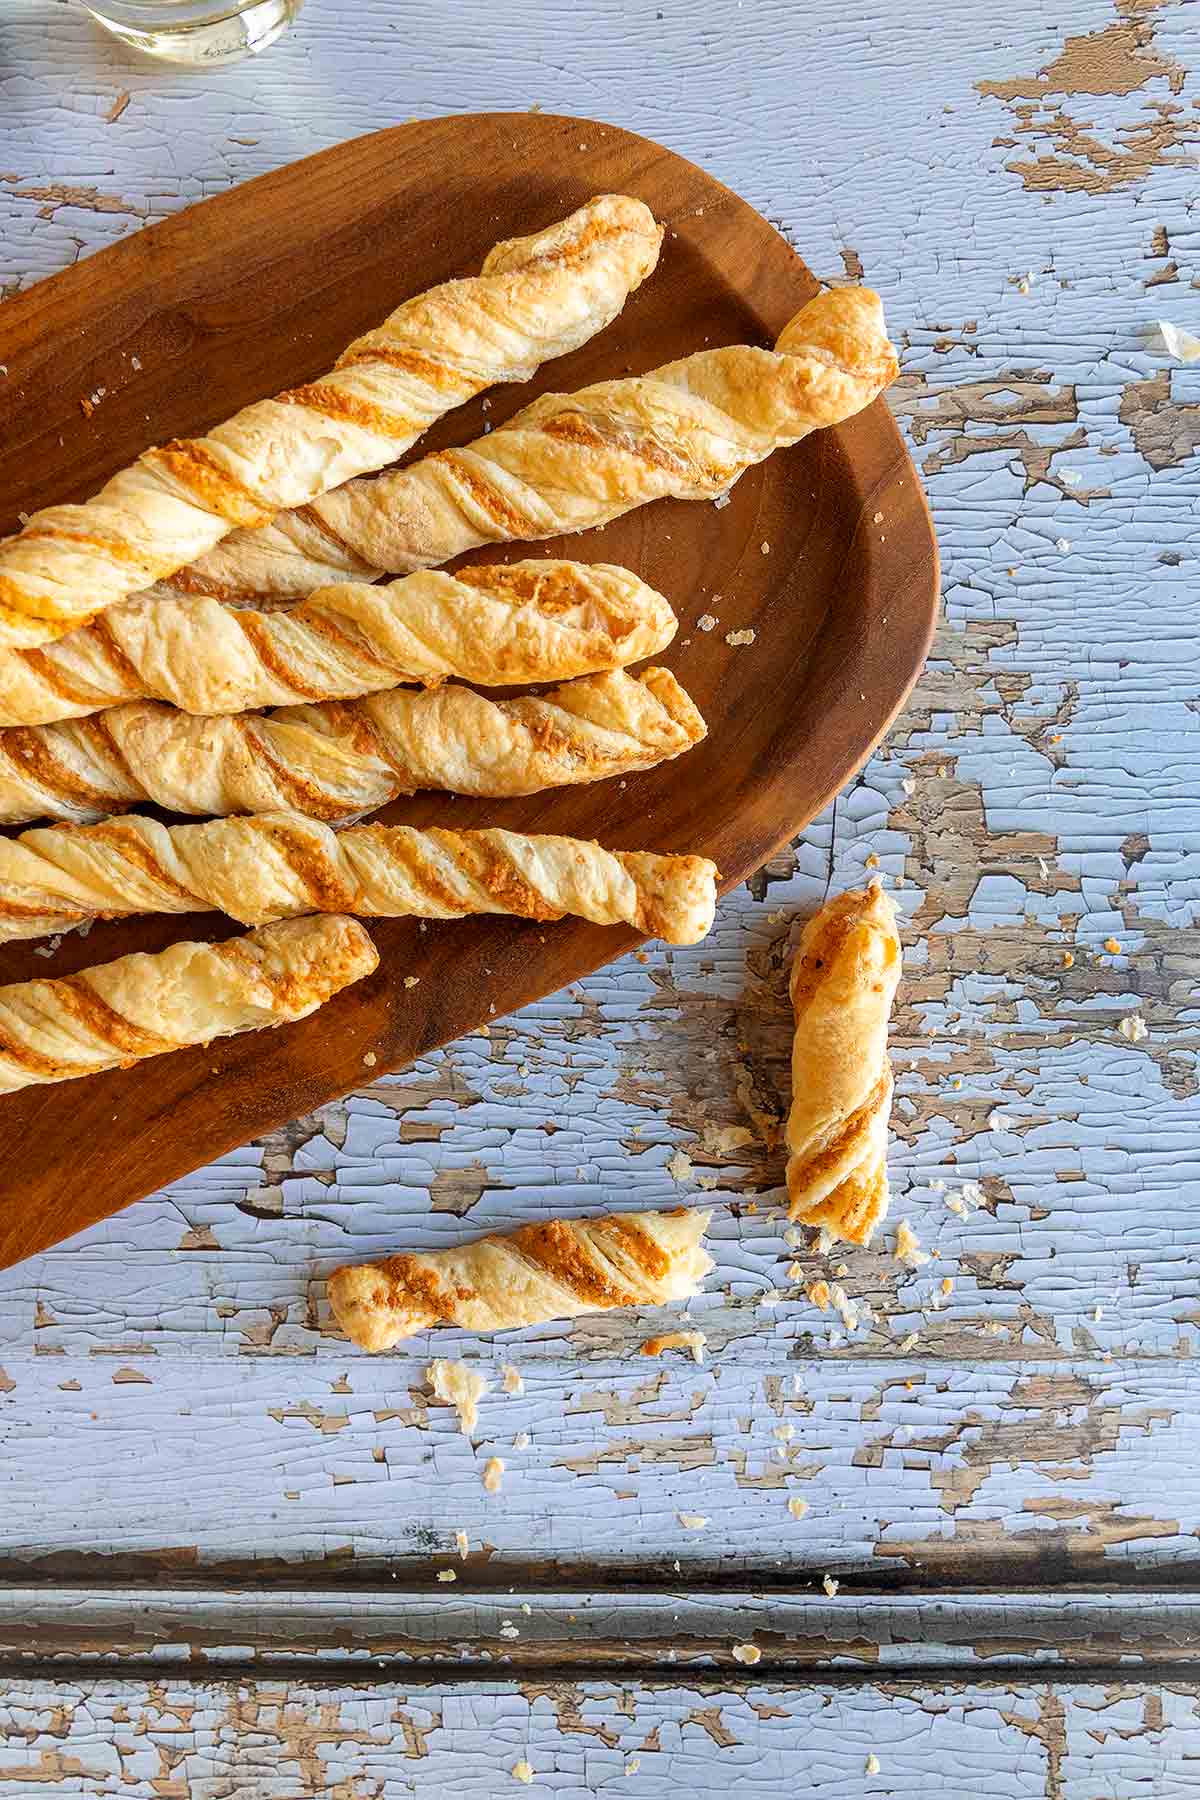 Cheese straws on an oval wooden platter on a distressed wooden surface.